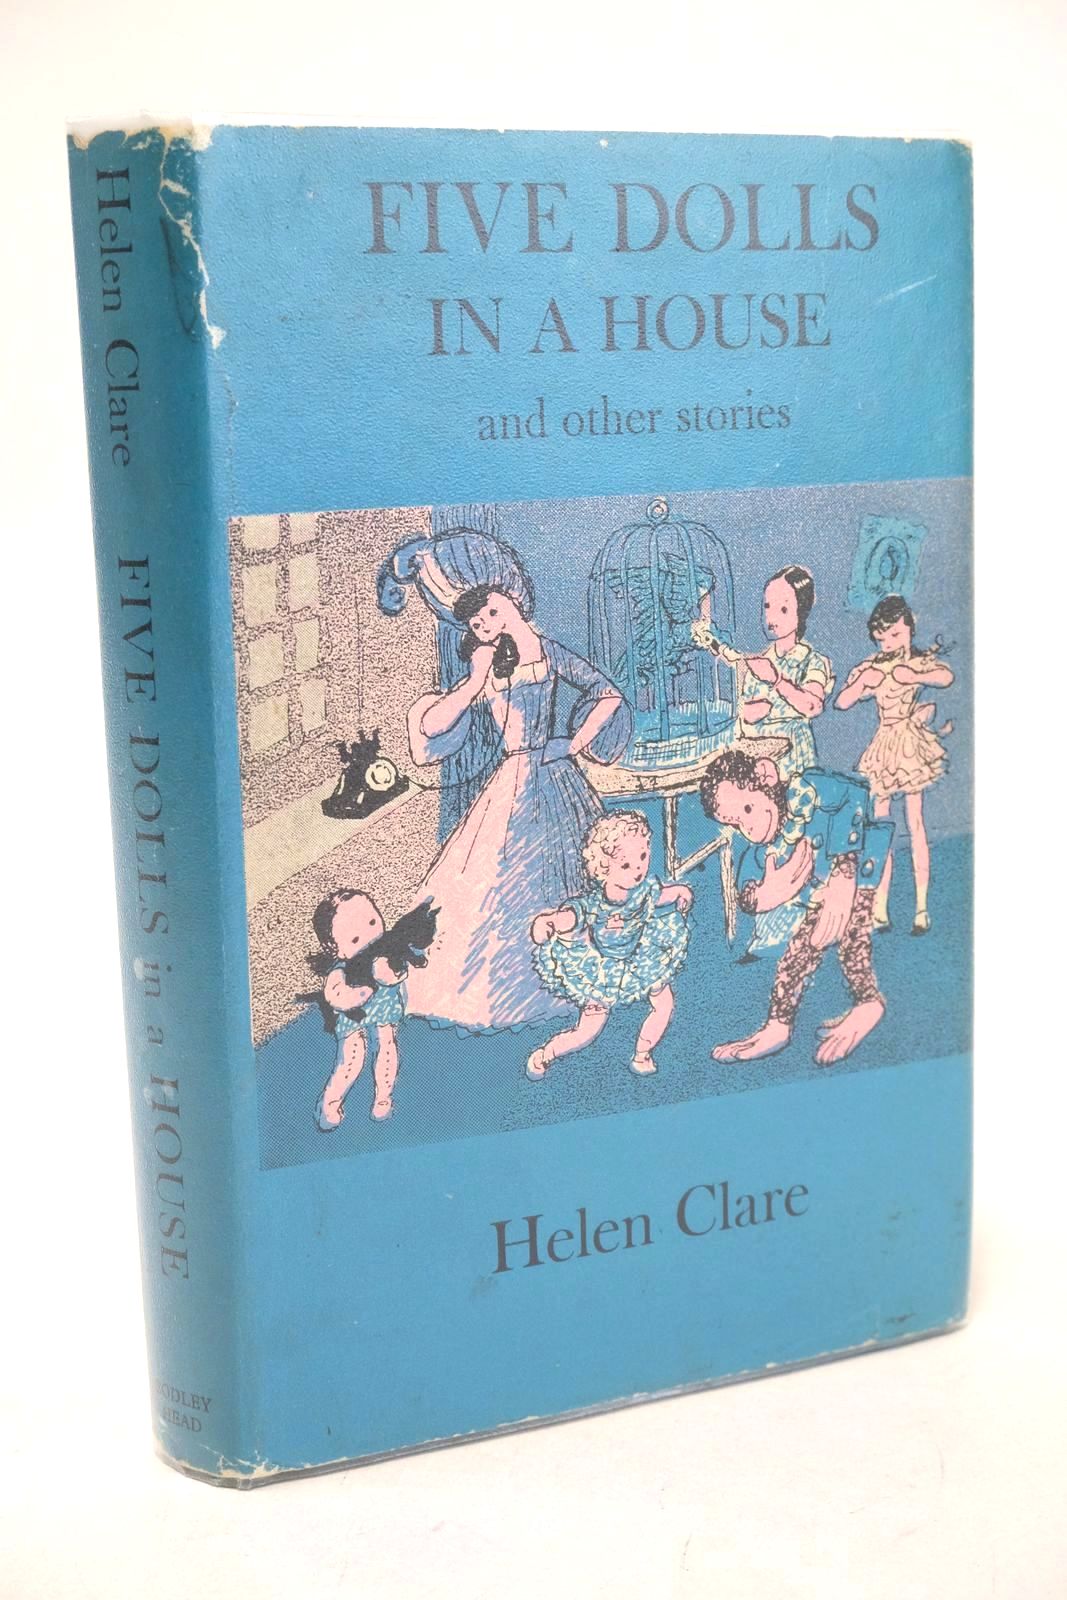 Photo of FIVE DOLLS IN A HOUSE AND OTHER STORIES written by Clare, Helen illustrated by Leslie, Cecil published by The Bodley Head (STOCK CODE: 1327216)  for sale by Stella & Rose's Books